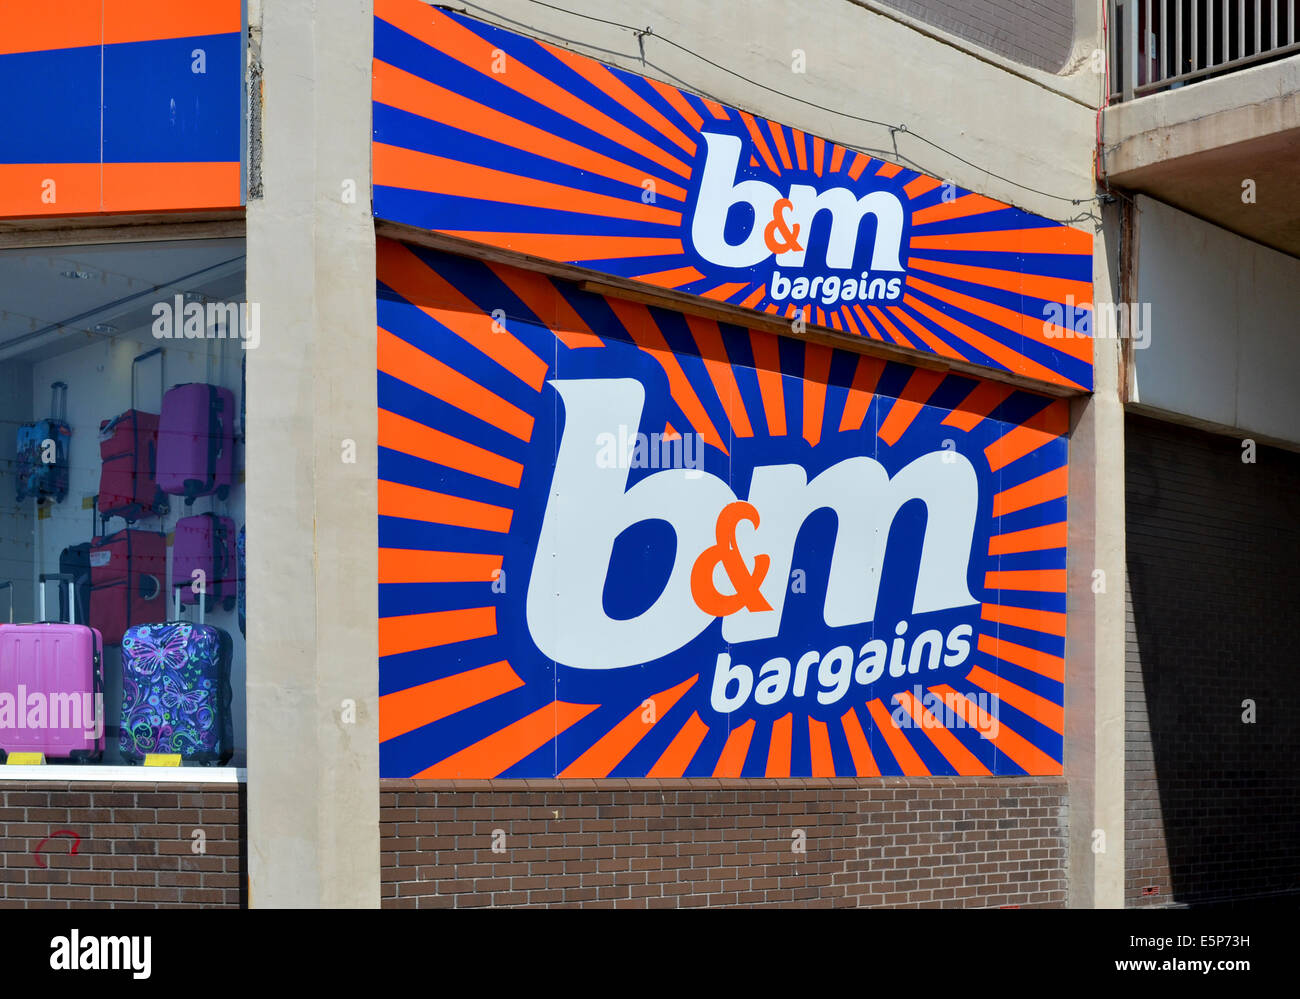 A B&M bargains store Stock Photo